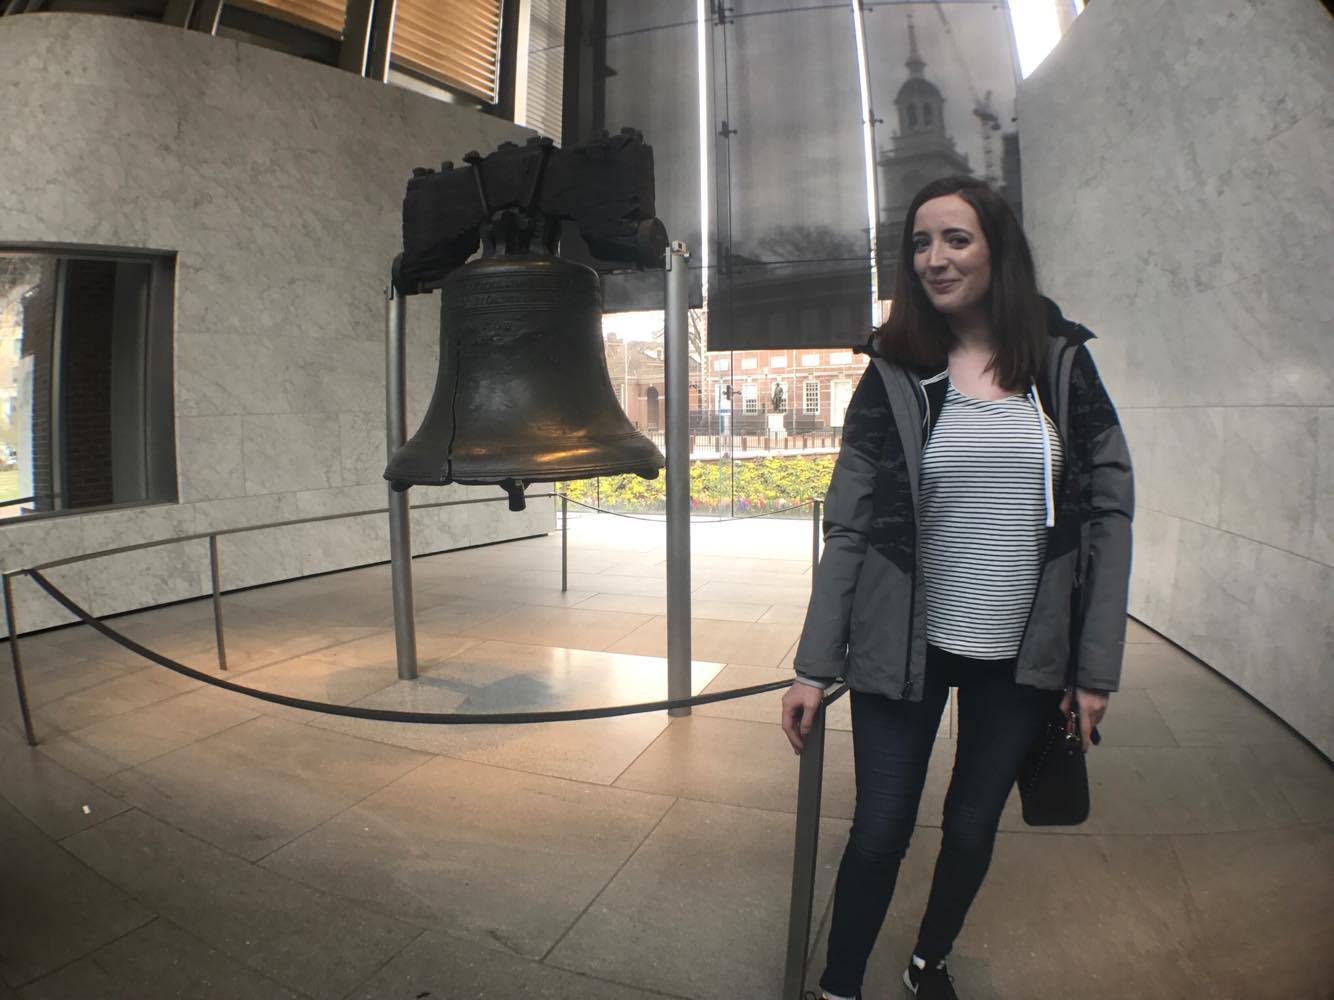 24 hours in Philly liberty bell